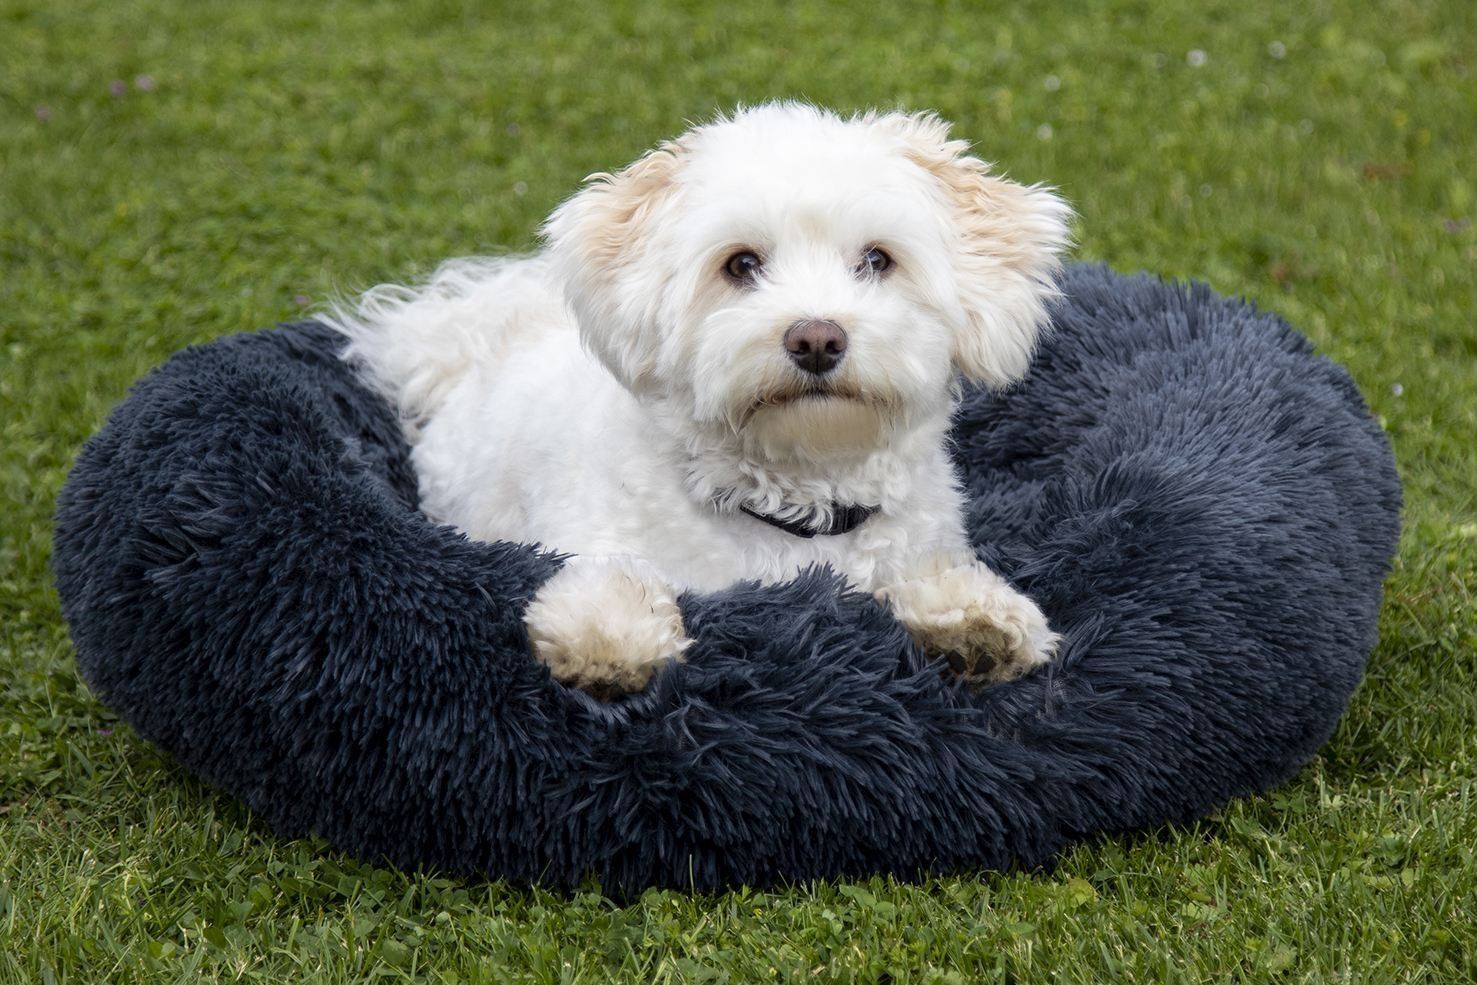 HKM Dog Bed Fluffy - Just Horse Riders